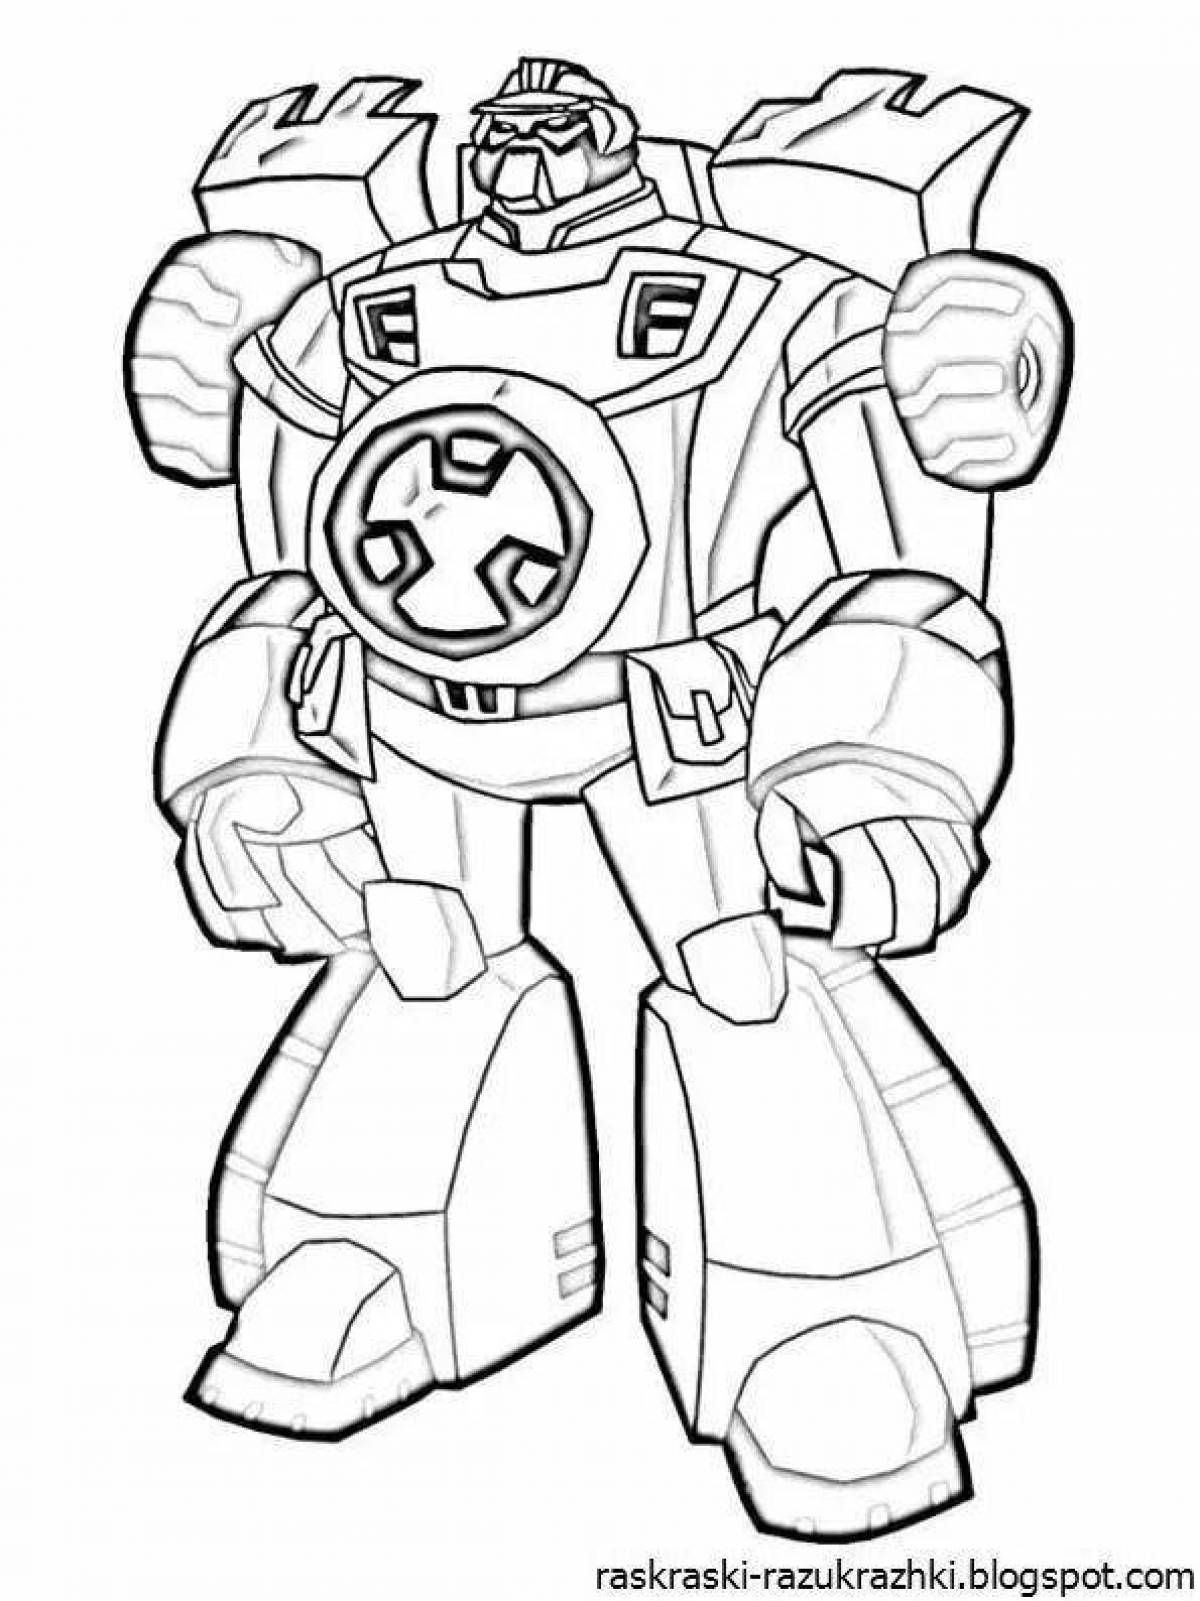 Animated tobot boy coloring page